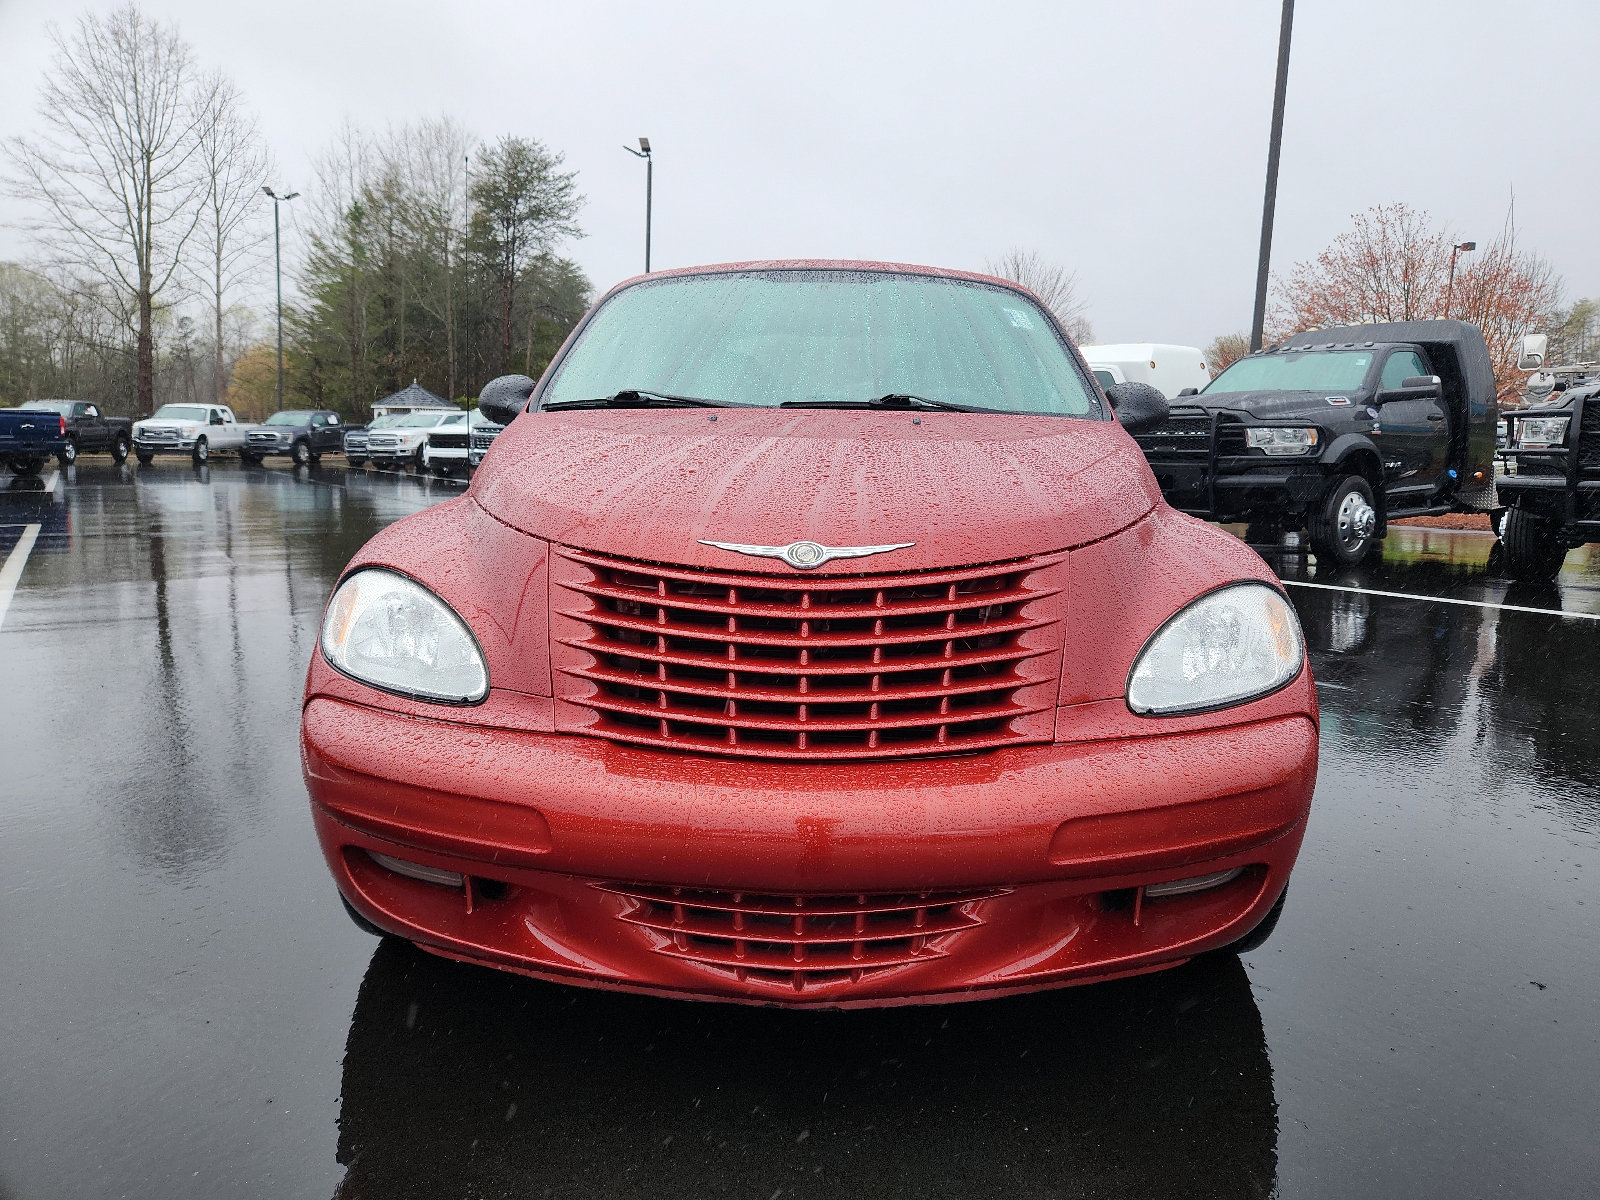 Used 2002 Chrysler PT Cruiser LIMITED with VIN 3C8FY68B02T264531 for sale in Winston-salem, NC